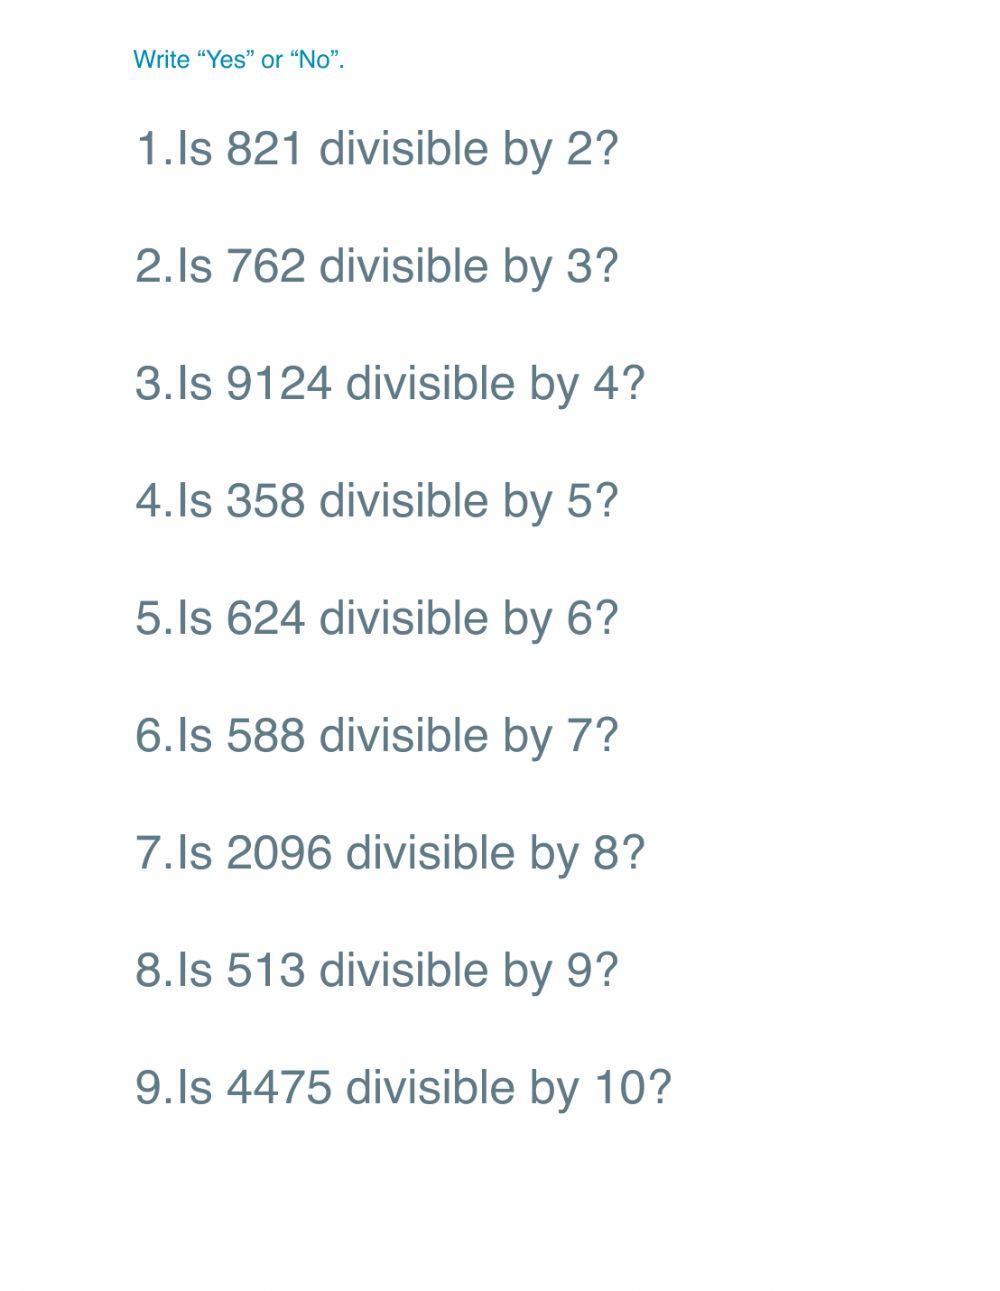 Divisibility Rules